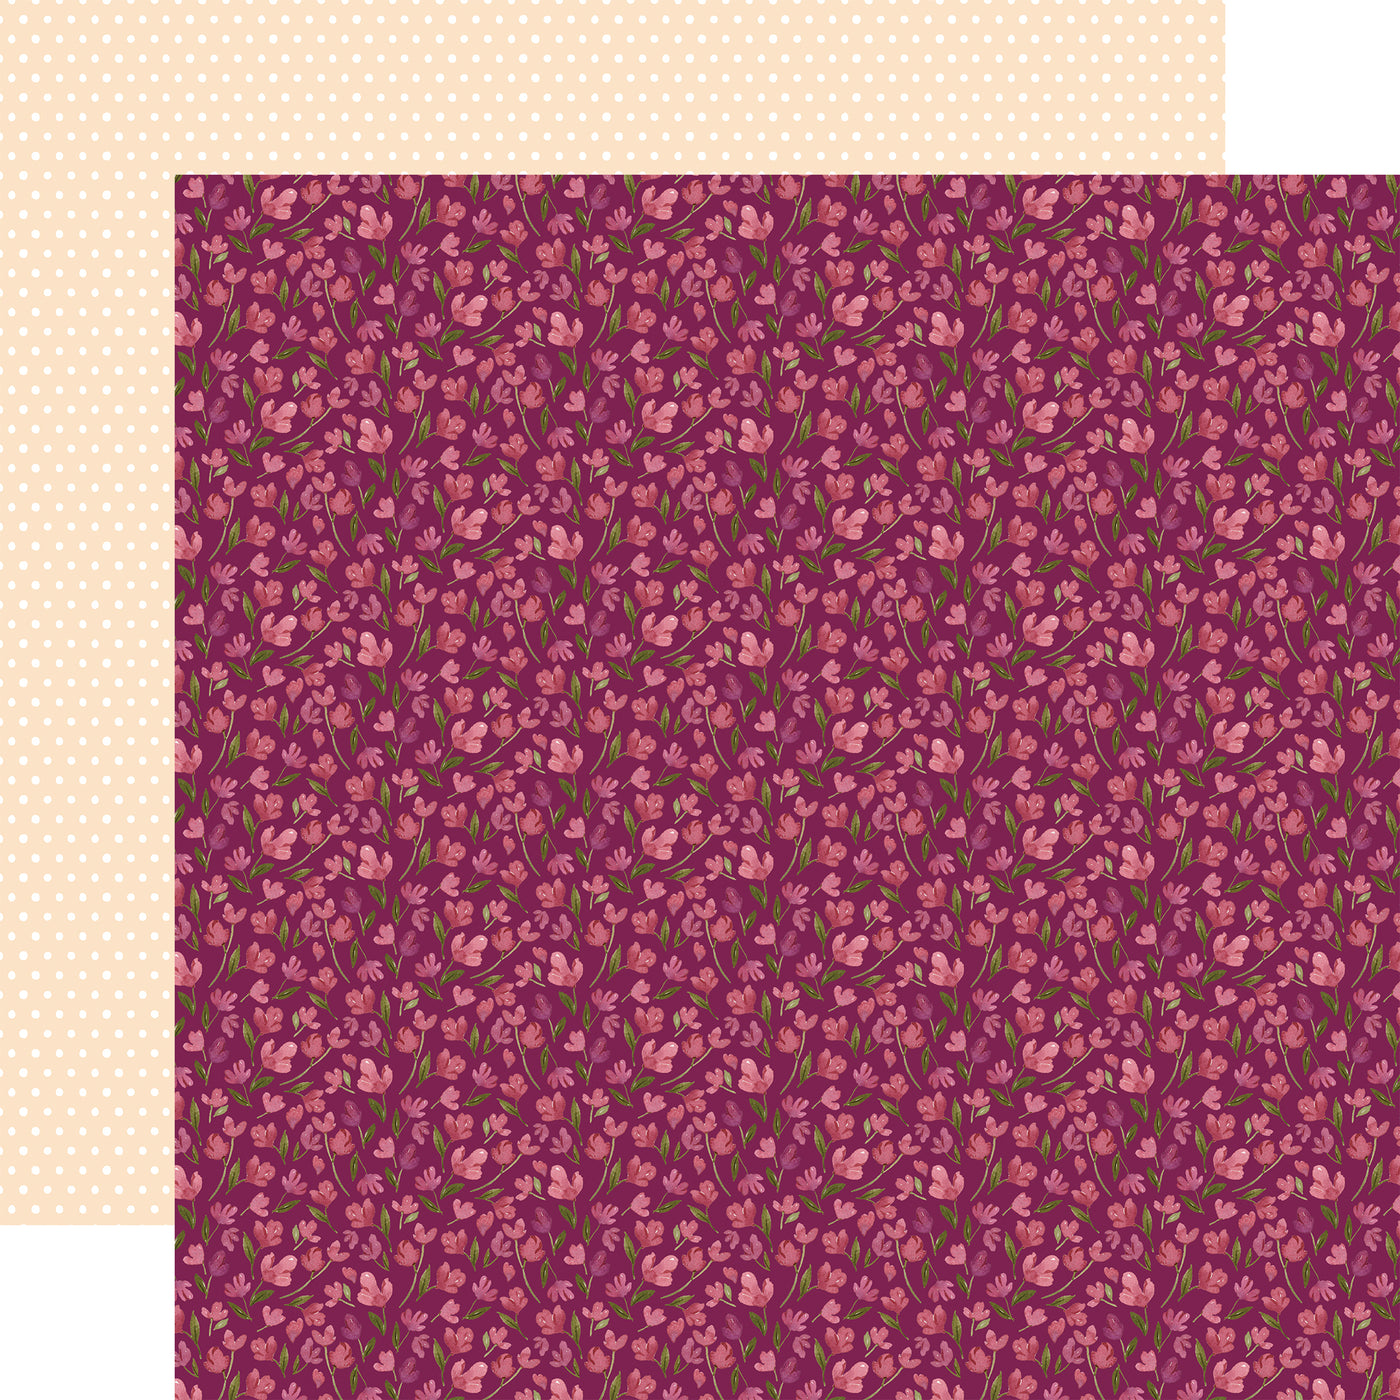 The front side of this paper has a beautiful floral pattern in shades of pink and maroon. The reverse side is a light pink color with a white Swiss dot pattern. 